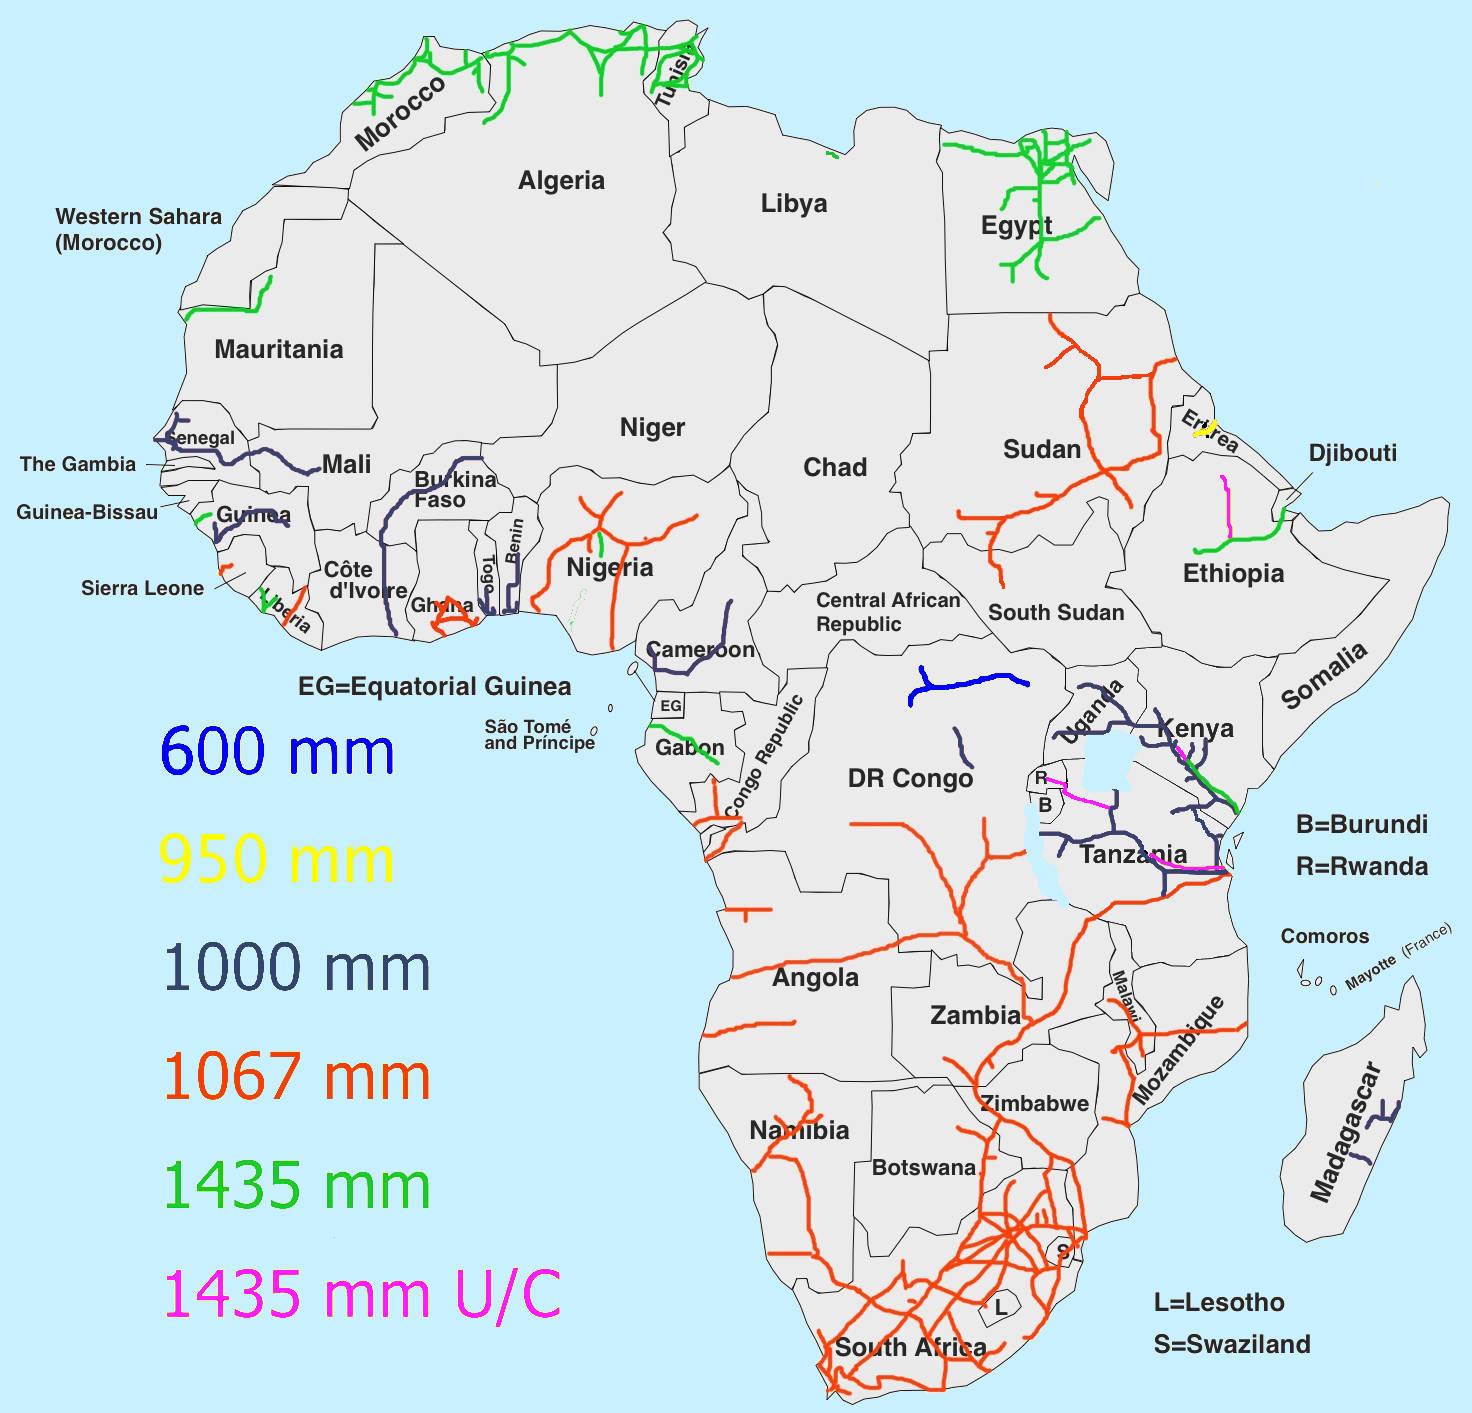 It is rather sparse: https://en.wikipedia.org/wiki/African_Union_of_Railways